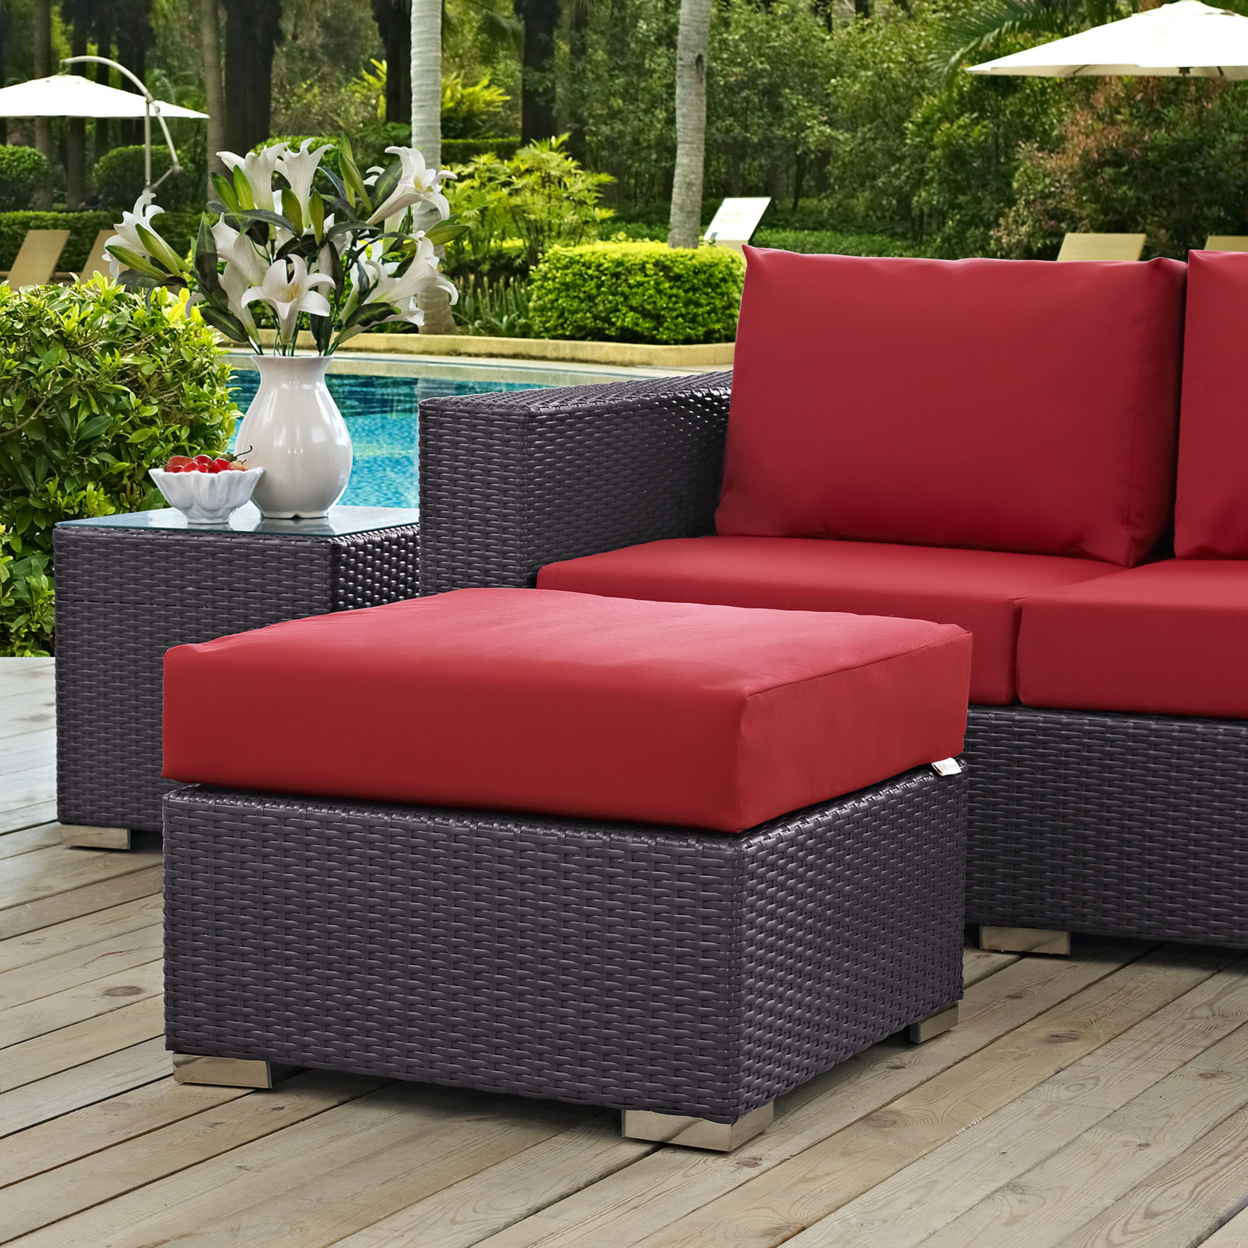 Red Red Convene Outdoor Patio Fabric Square Ottoman